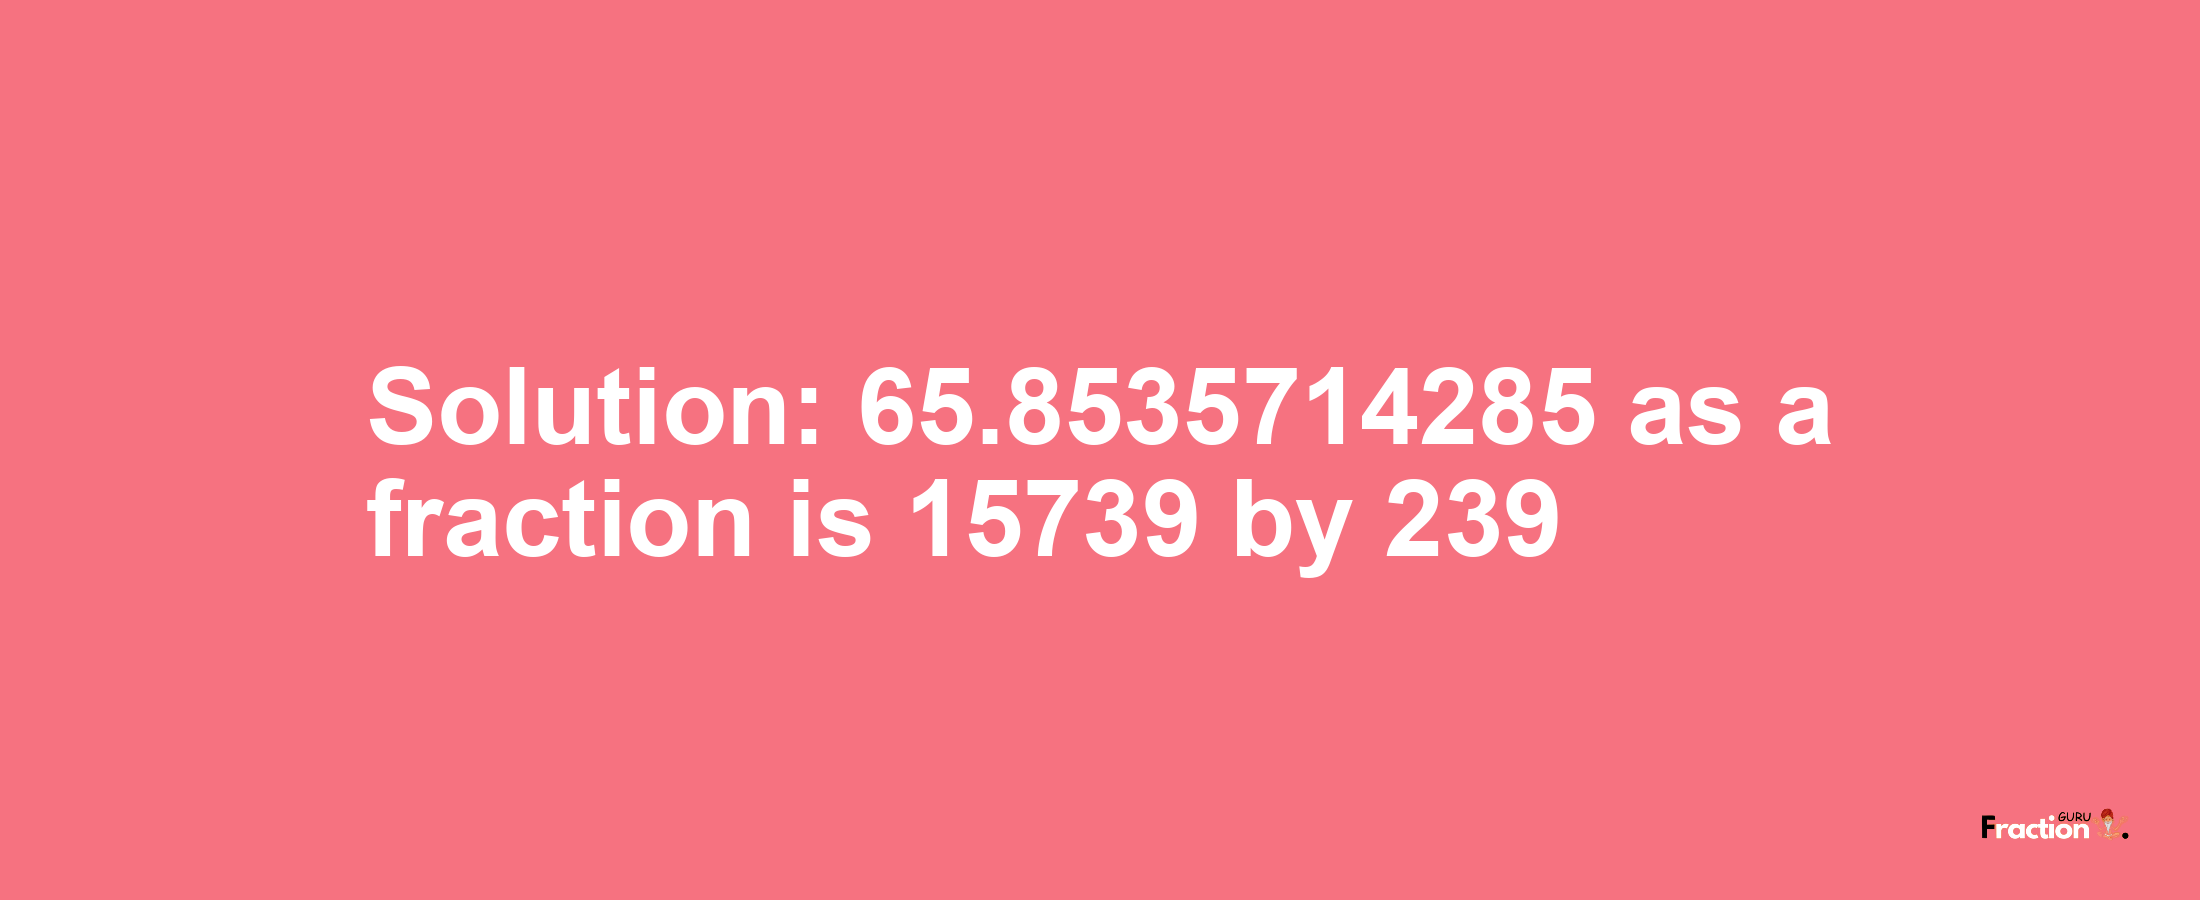 Solution:65.8535714285 as a fraction is 15739/239